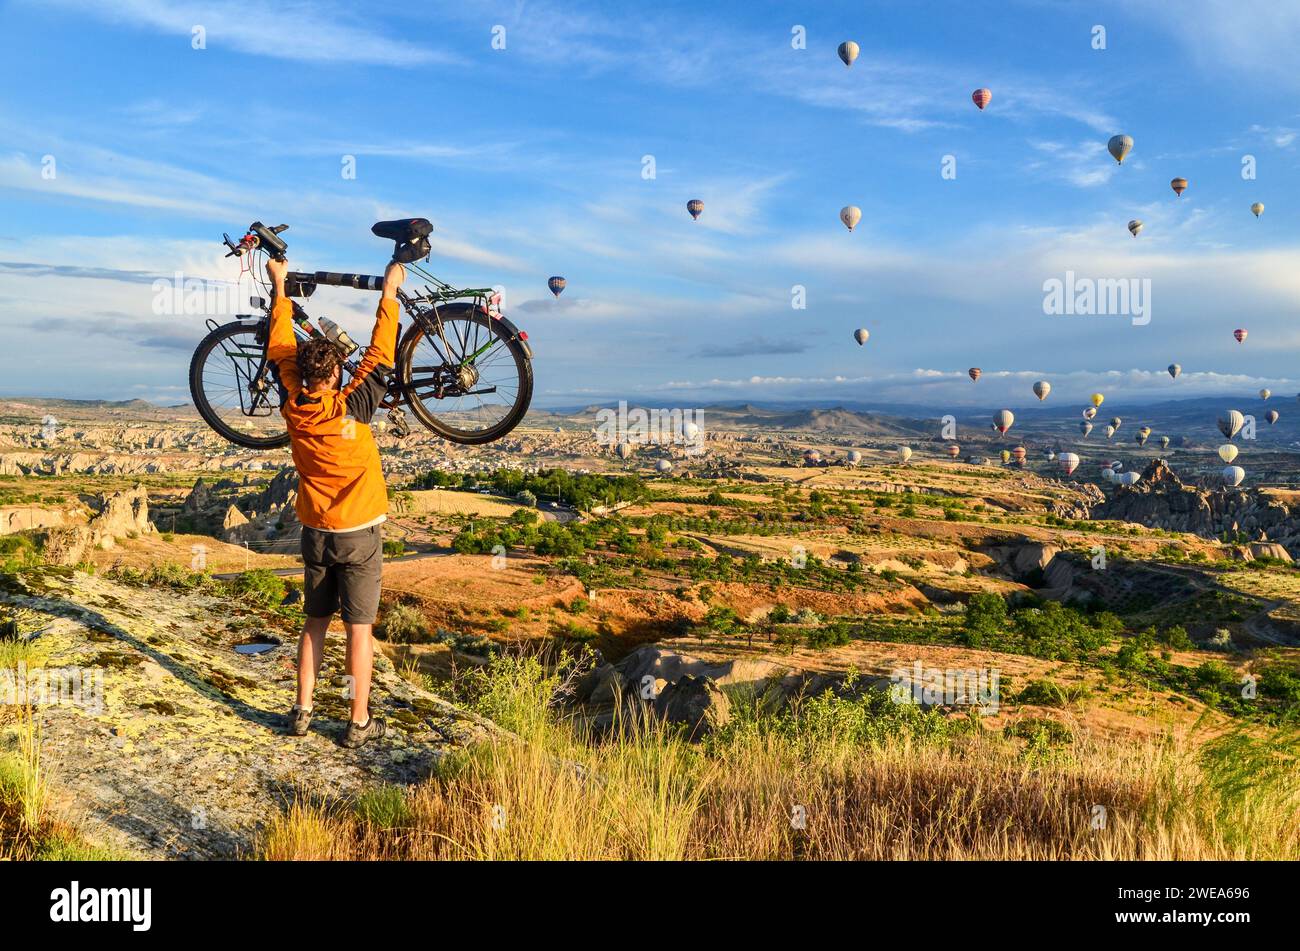 Man lifting his touring bicycle in Cappadocia, in front of the air balloons rising in the early hours of a sunny day Stock Photo